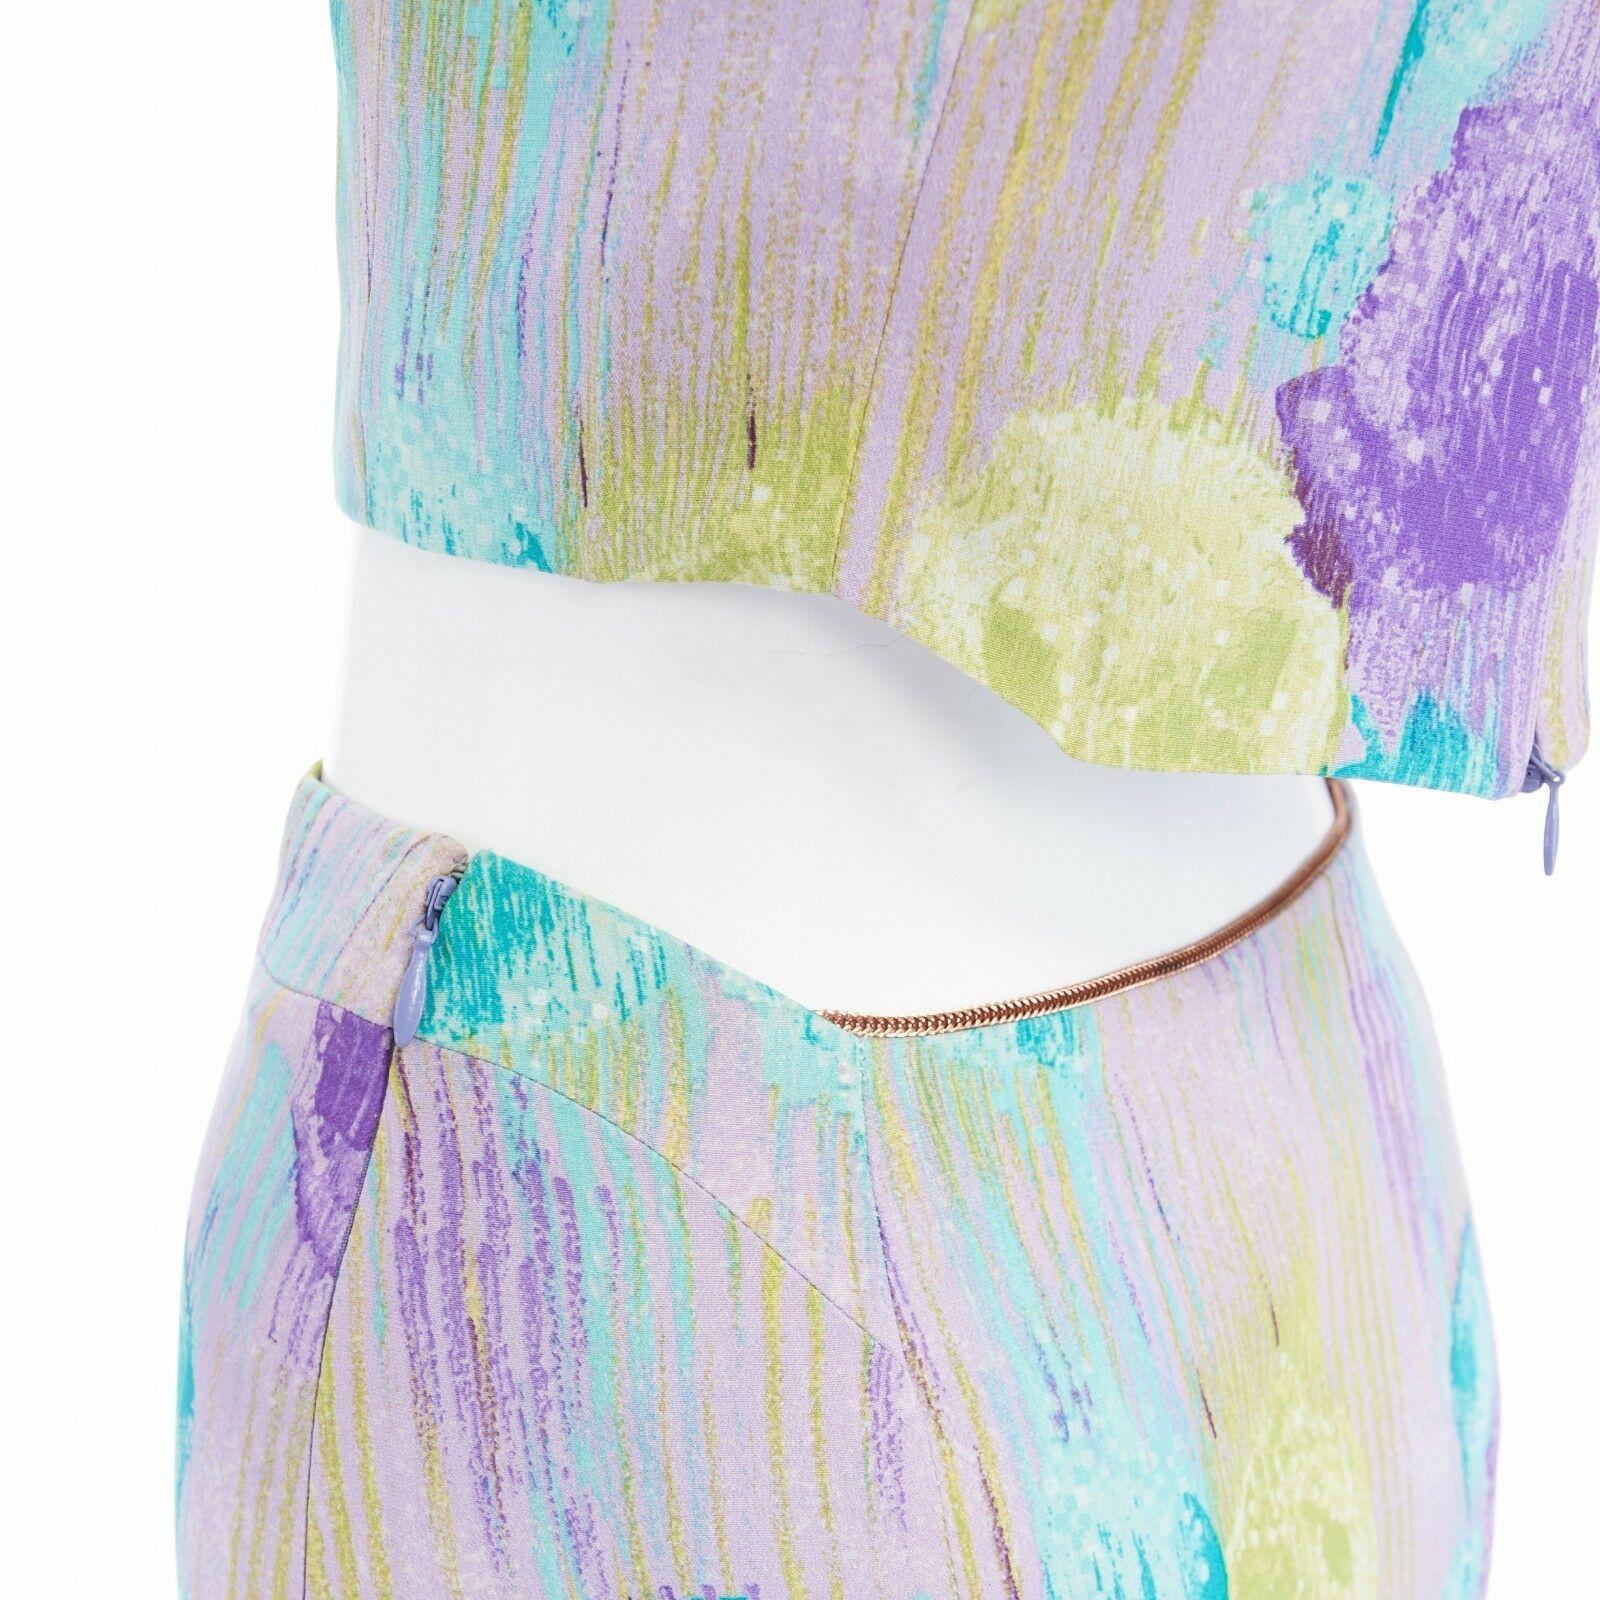 GIANNI VERSACE Vintage 1990s abstract floral print chain trim crop top skirt XS
GIANNI VERSACE
FROM THE 90'S
100% silk . 
Lilac purple base . 
Abstract floral, dripped paint effect purple, lime green and teal blue print throughout . Angular wide